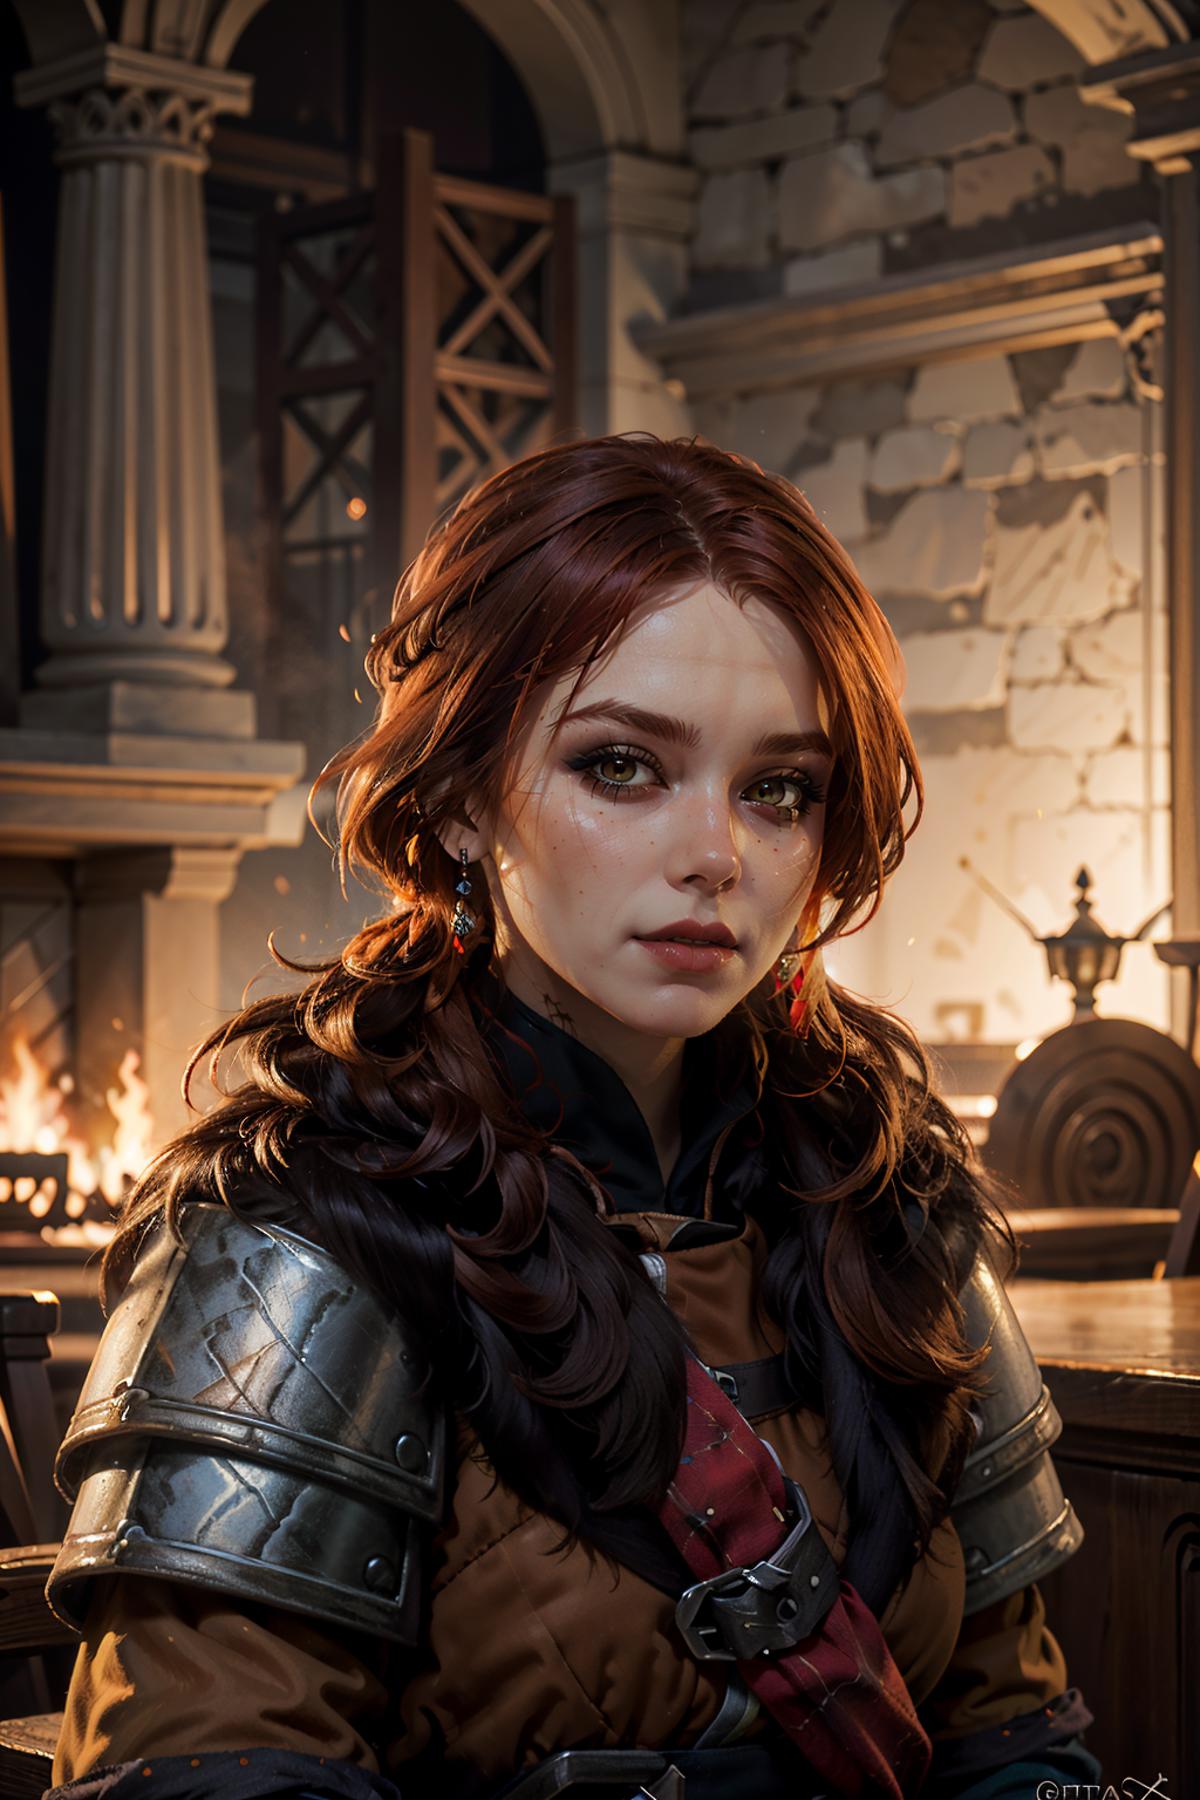 Cerys Metz from The Witcher 3 image by BloodRedKittie